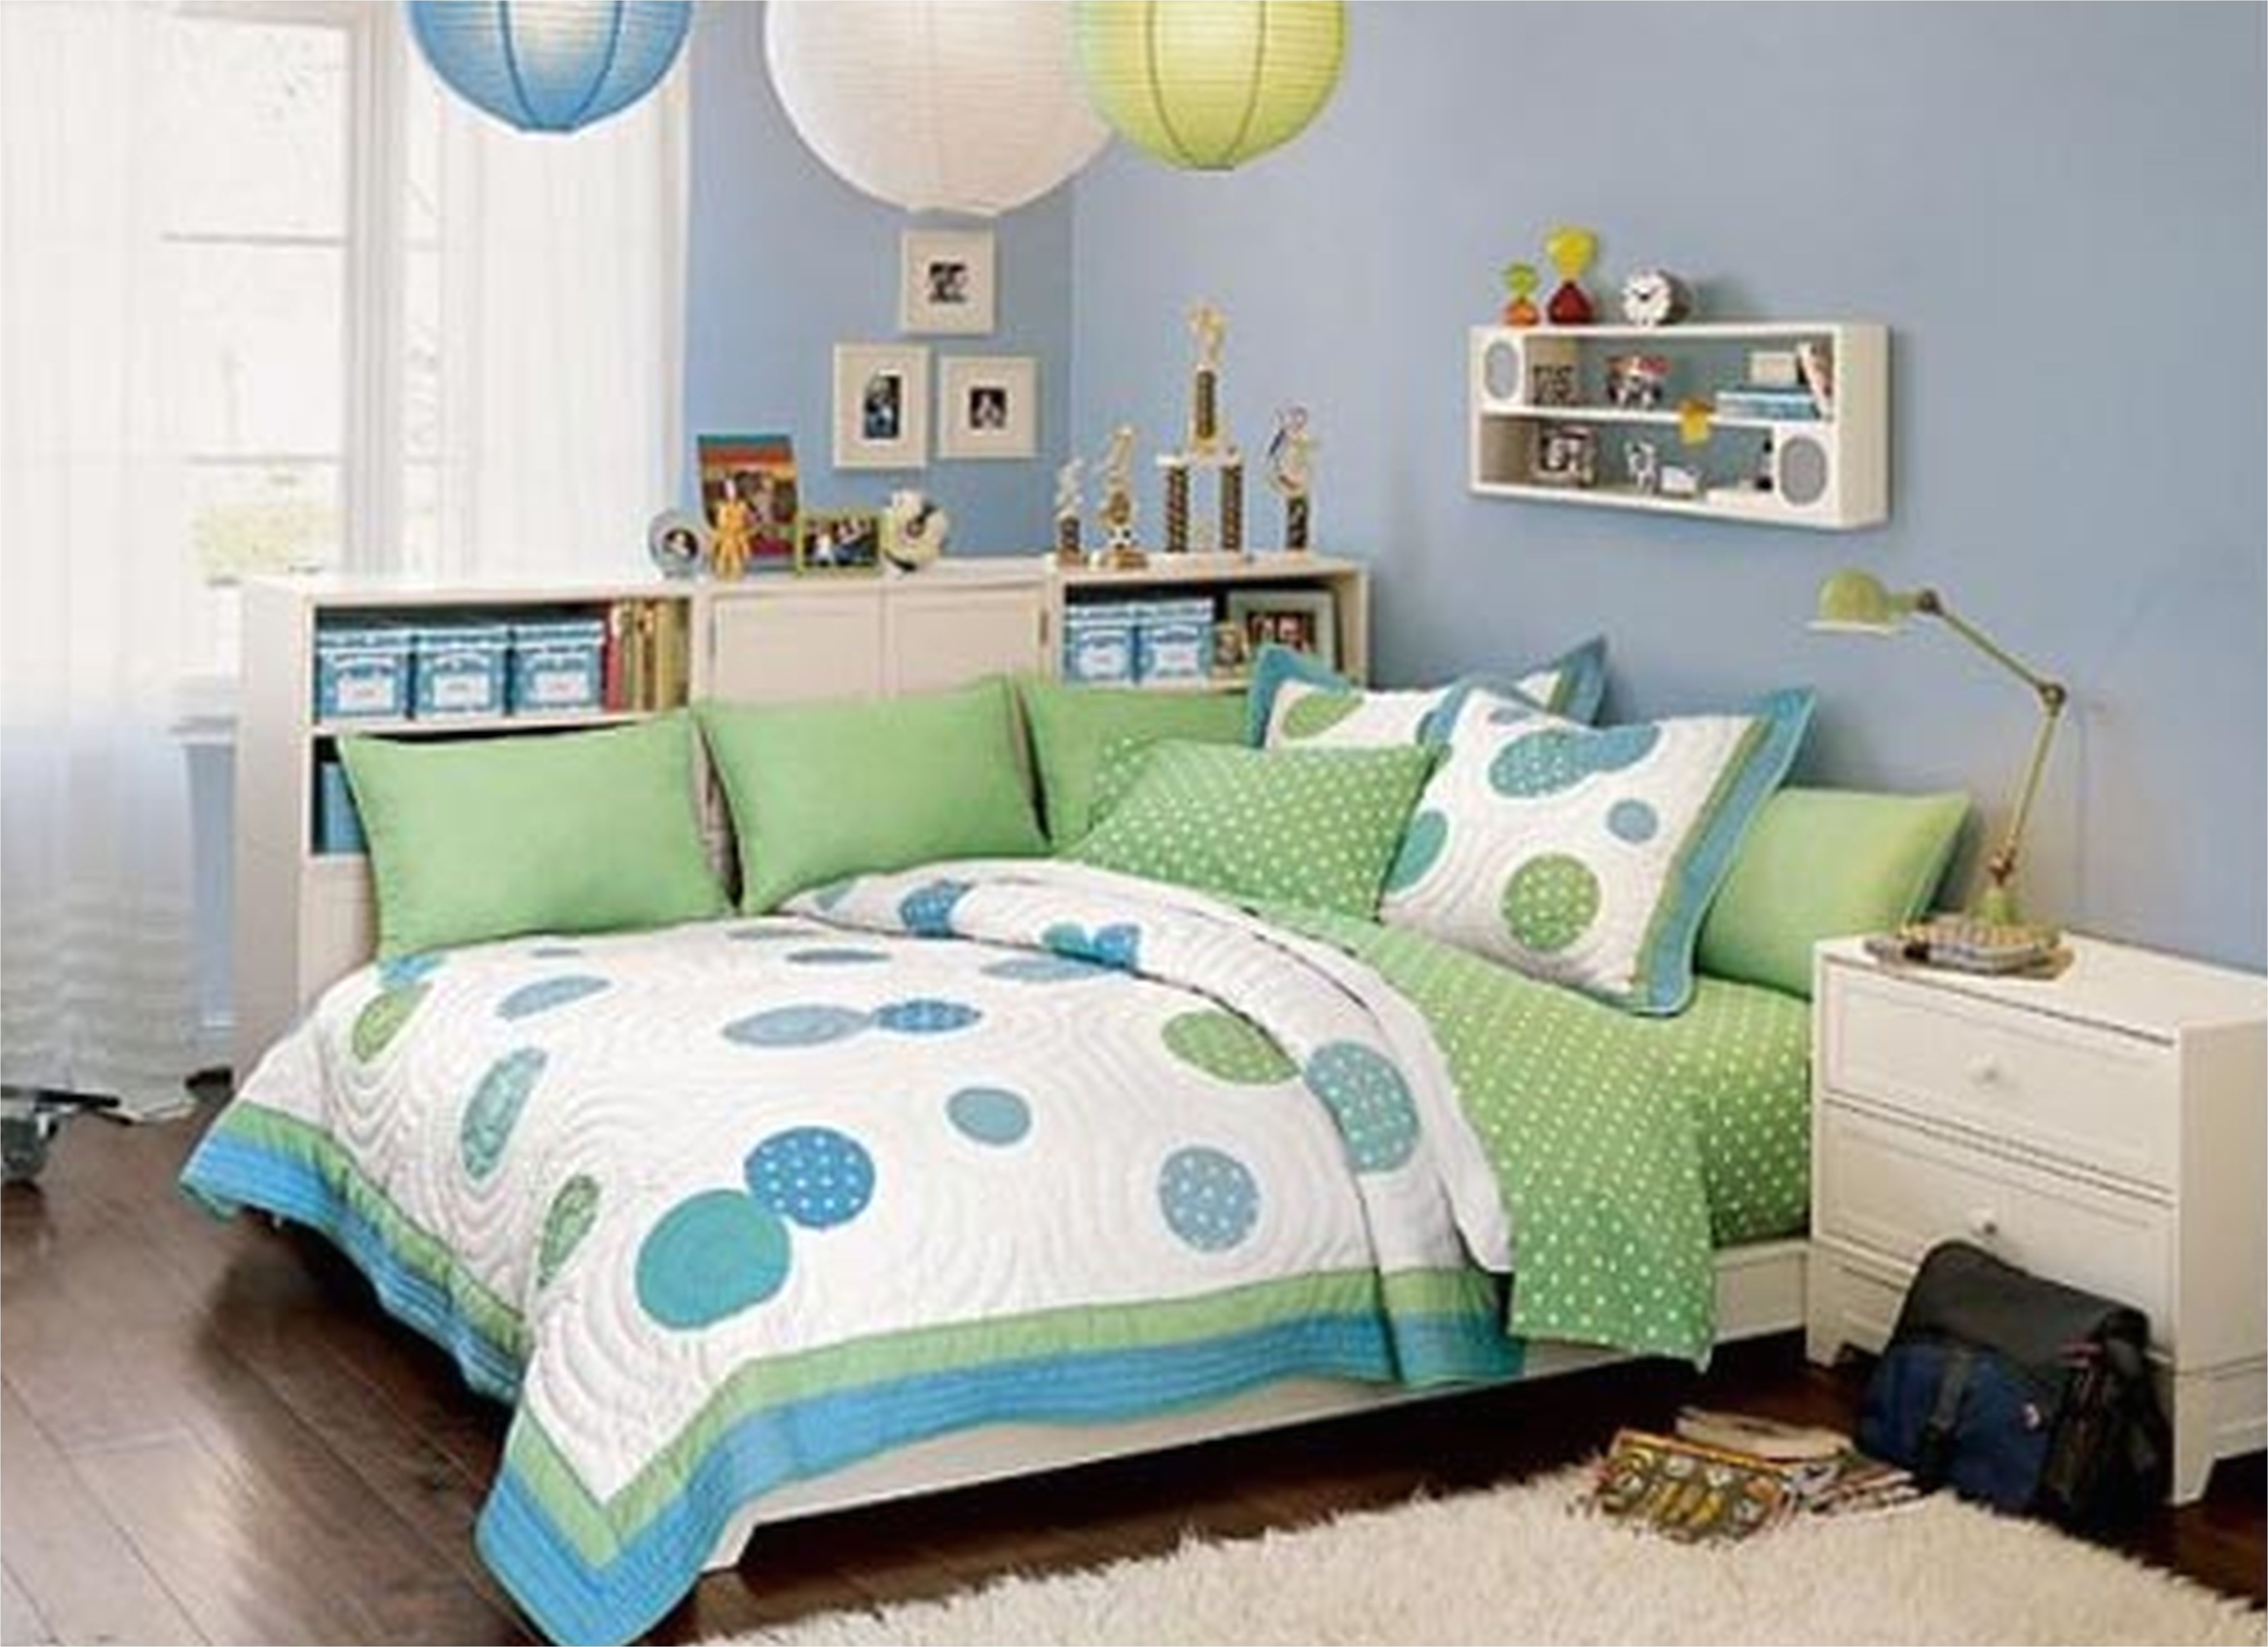 Teen Girl Bedroom Designs Enchanting With Wall Painting And Simple Furniture For Teenage Girls Bedroom